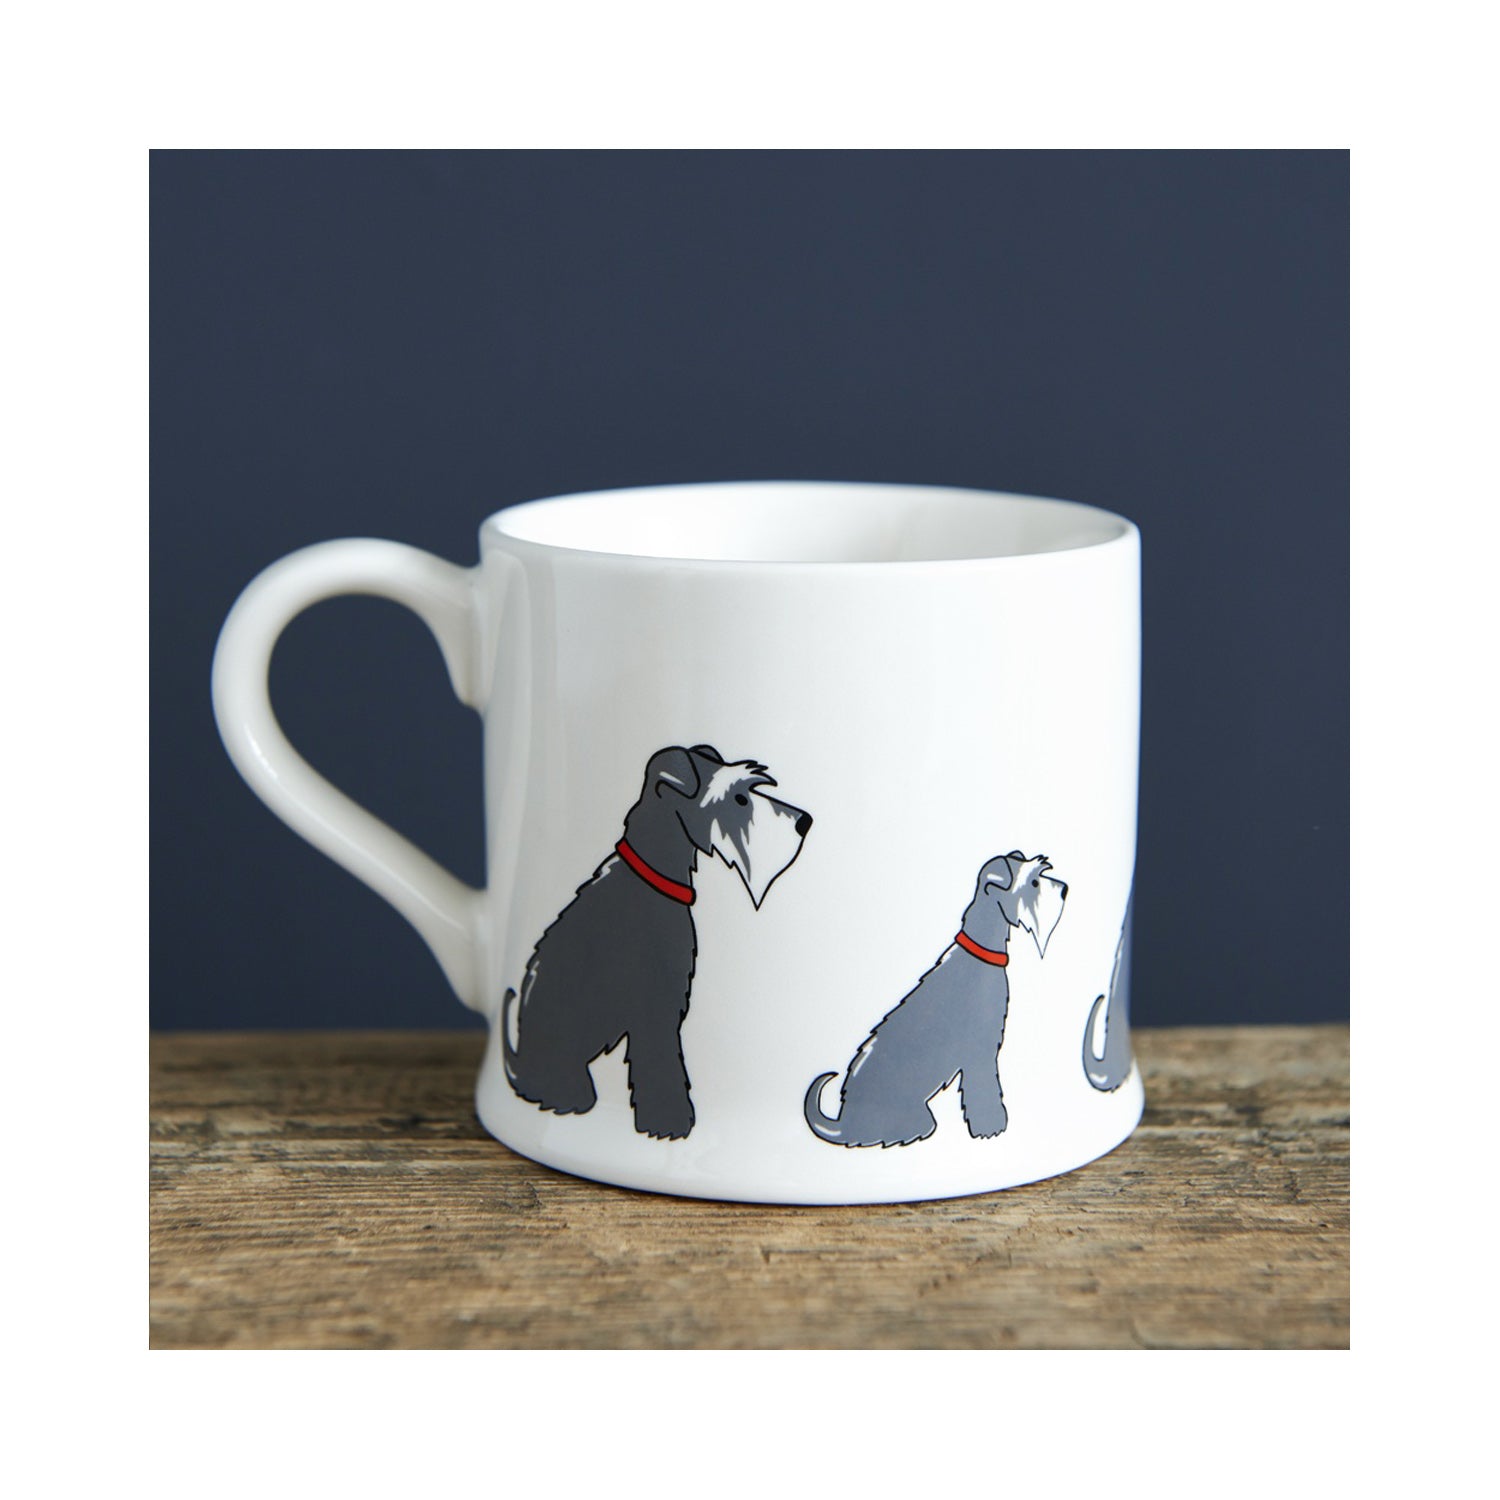 Dog Lover Gifts available at Dog Krazy Gifts- Eddie The Grey & White Schnauzer Mug - part of the Sweet William range available from Dog Krazy Gifts